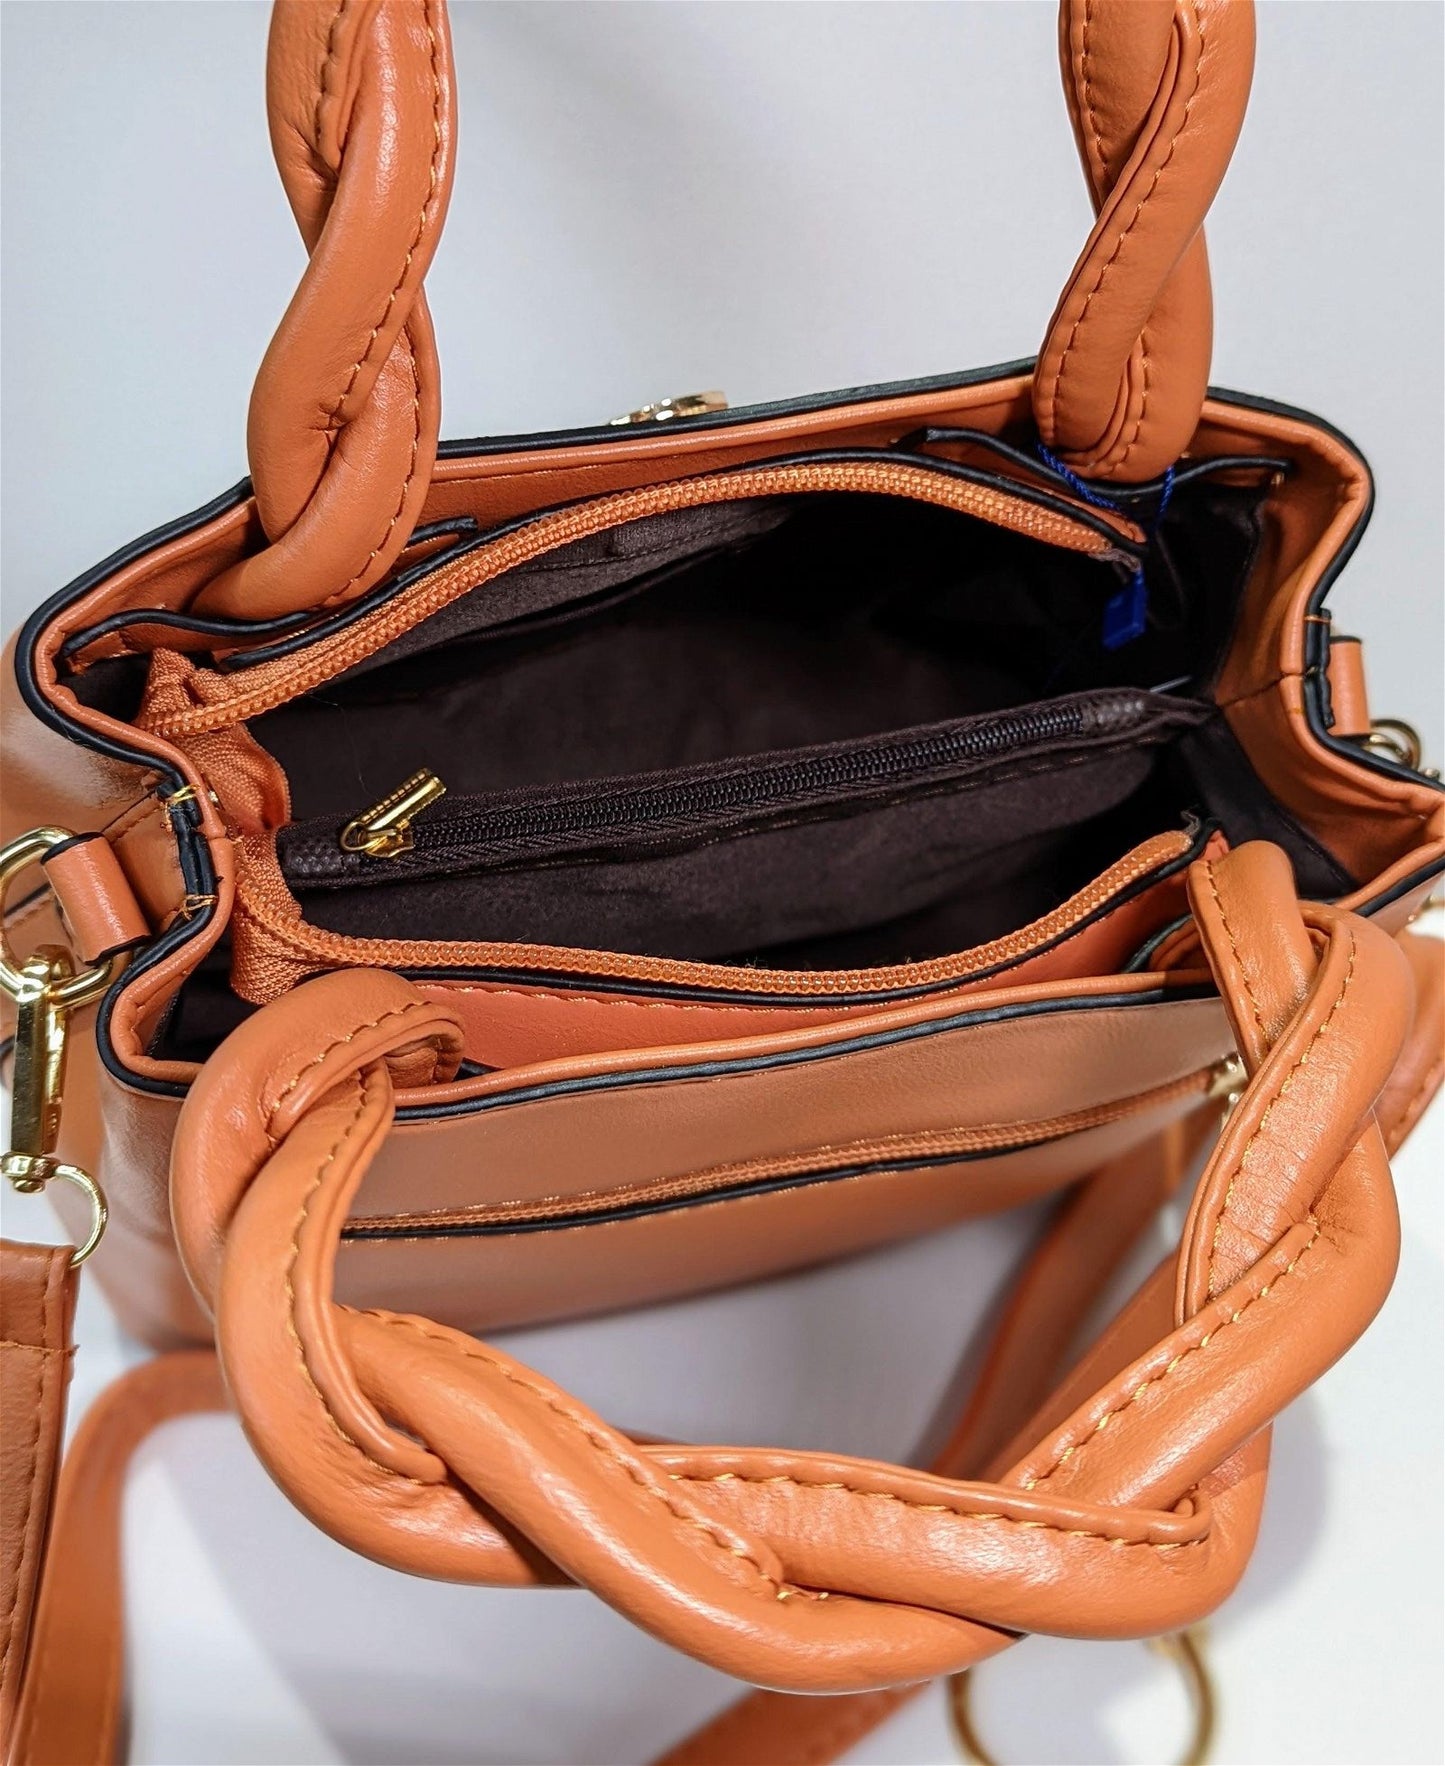 The Twisted Handler Bag - Maily's Classic Accessories